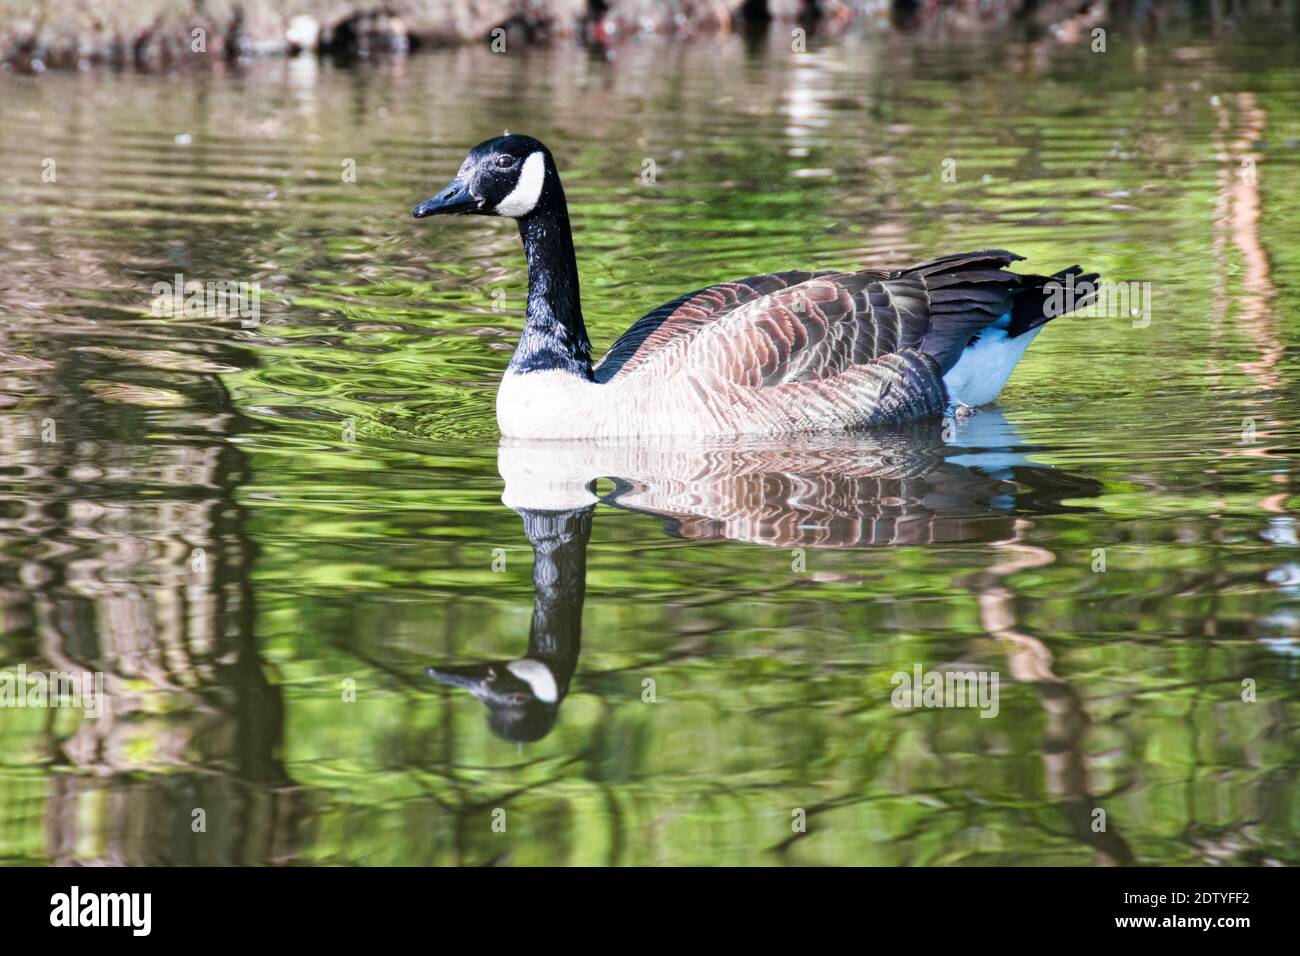 Canadian goose in the water of a pond Stock Photo